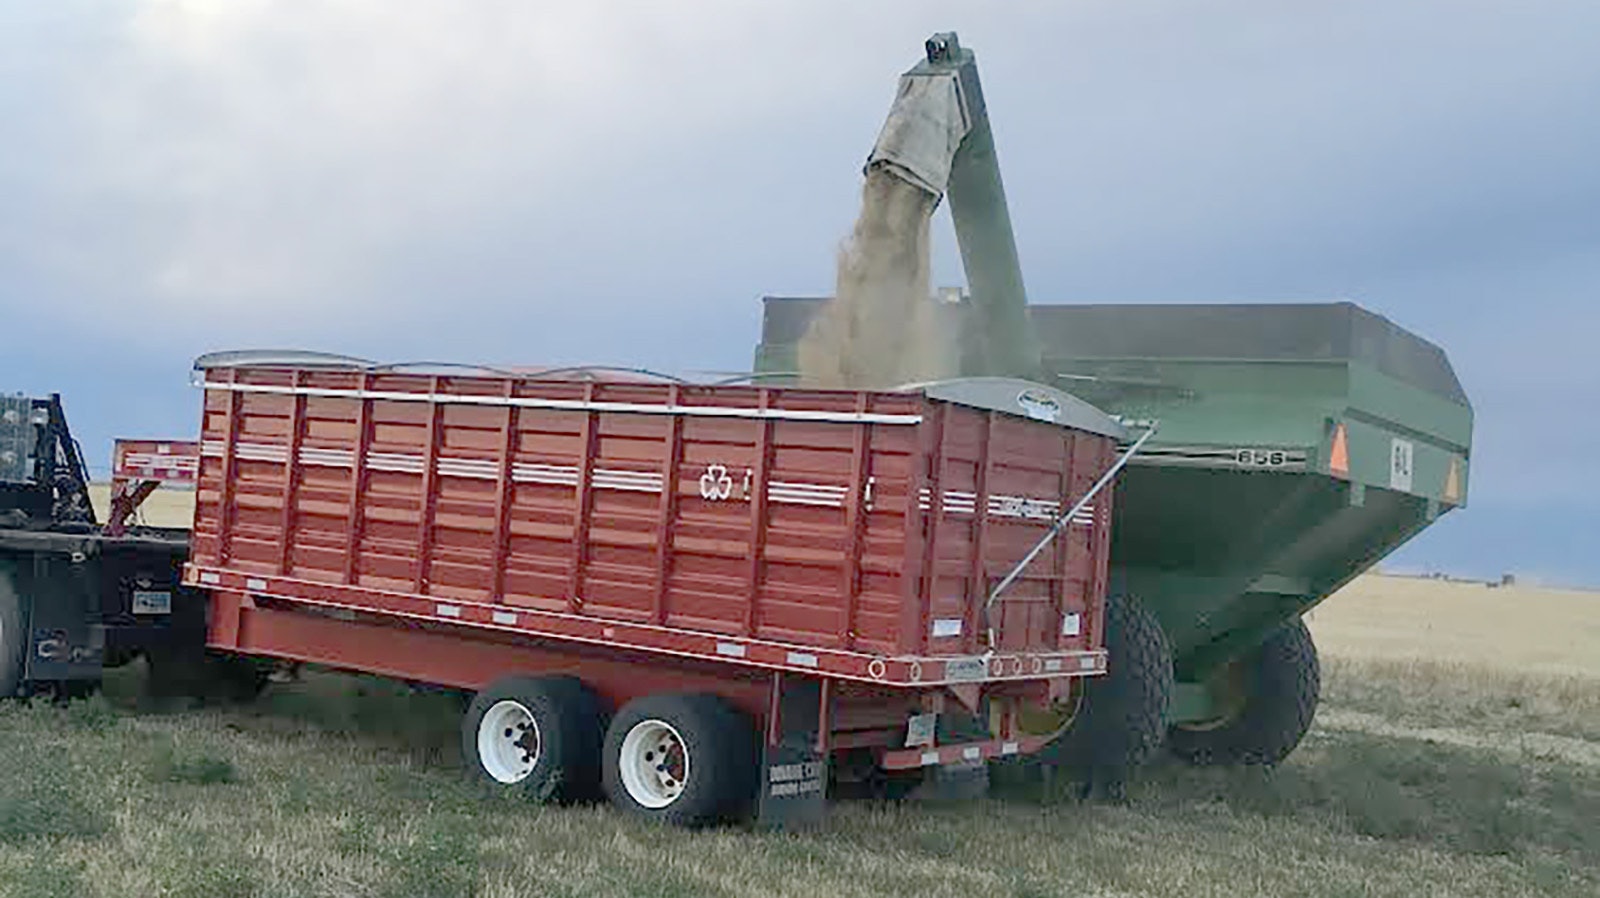 Barley that's been harvested is collected onto a trailer.